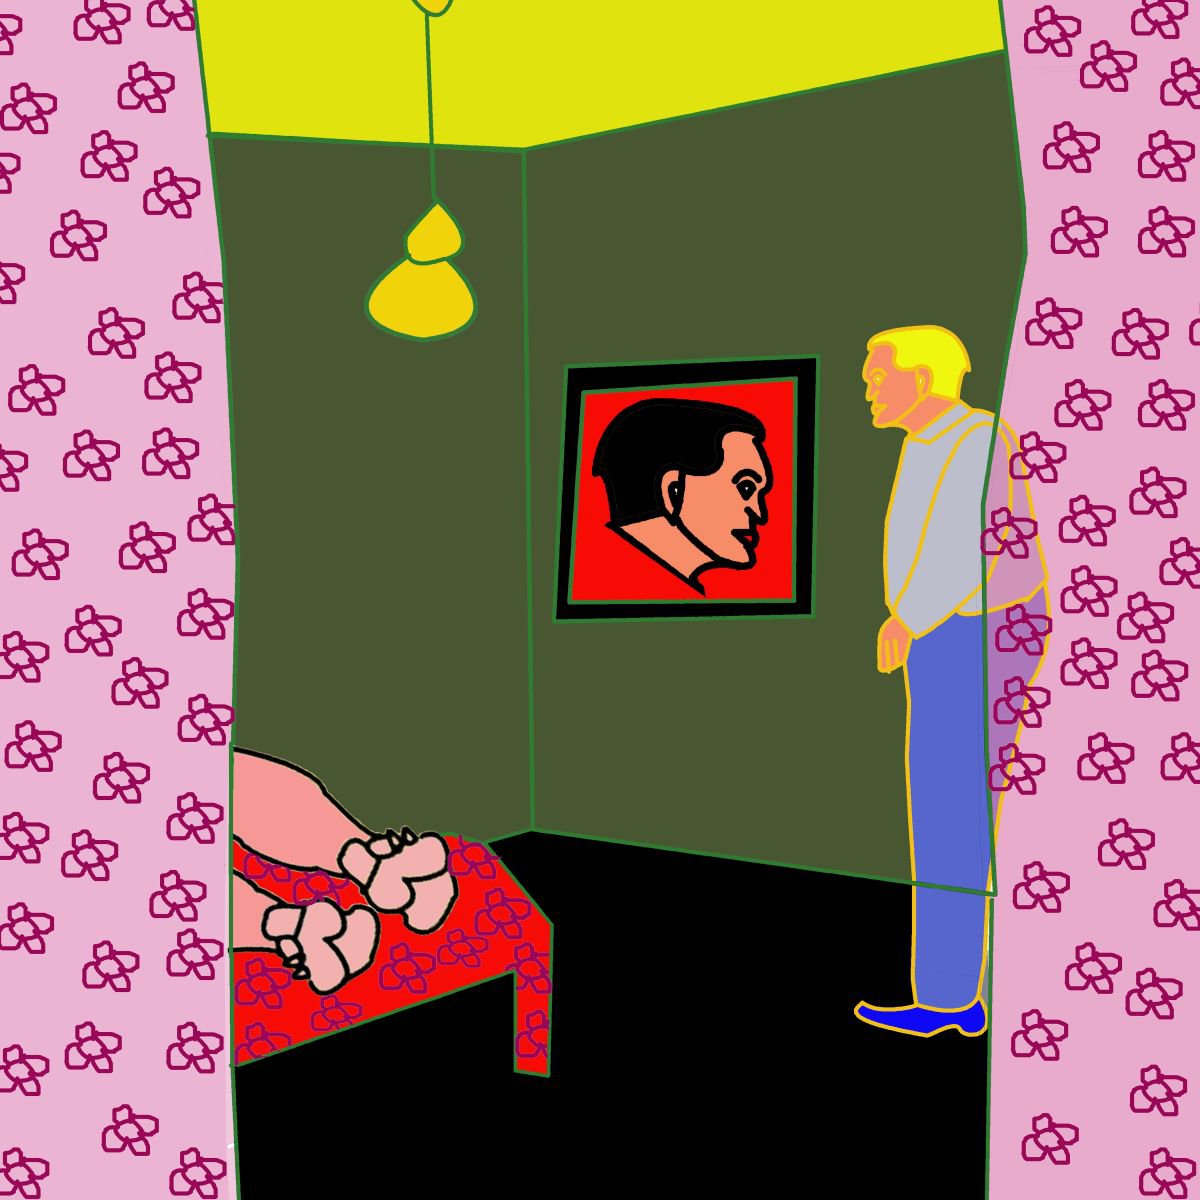 Behind the curtains by Rina Mualem - Pop art